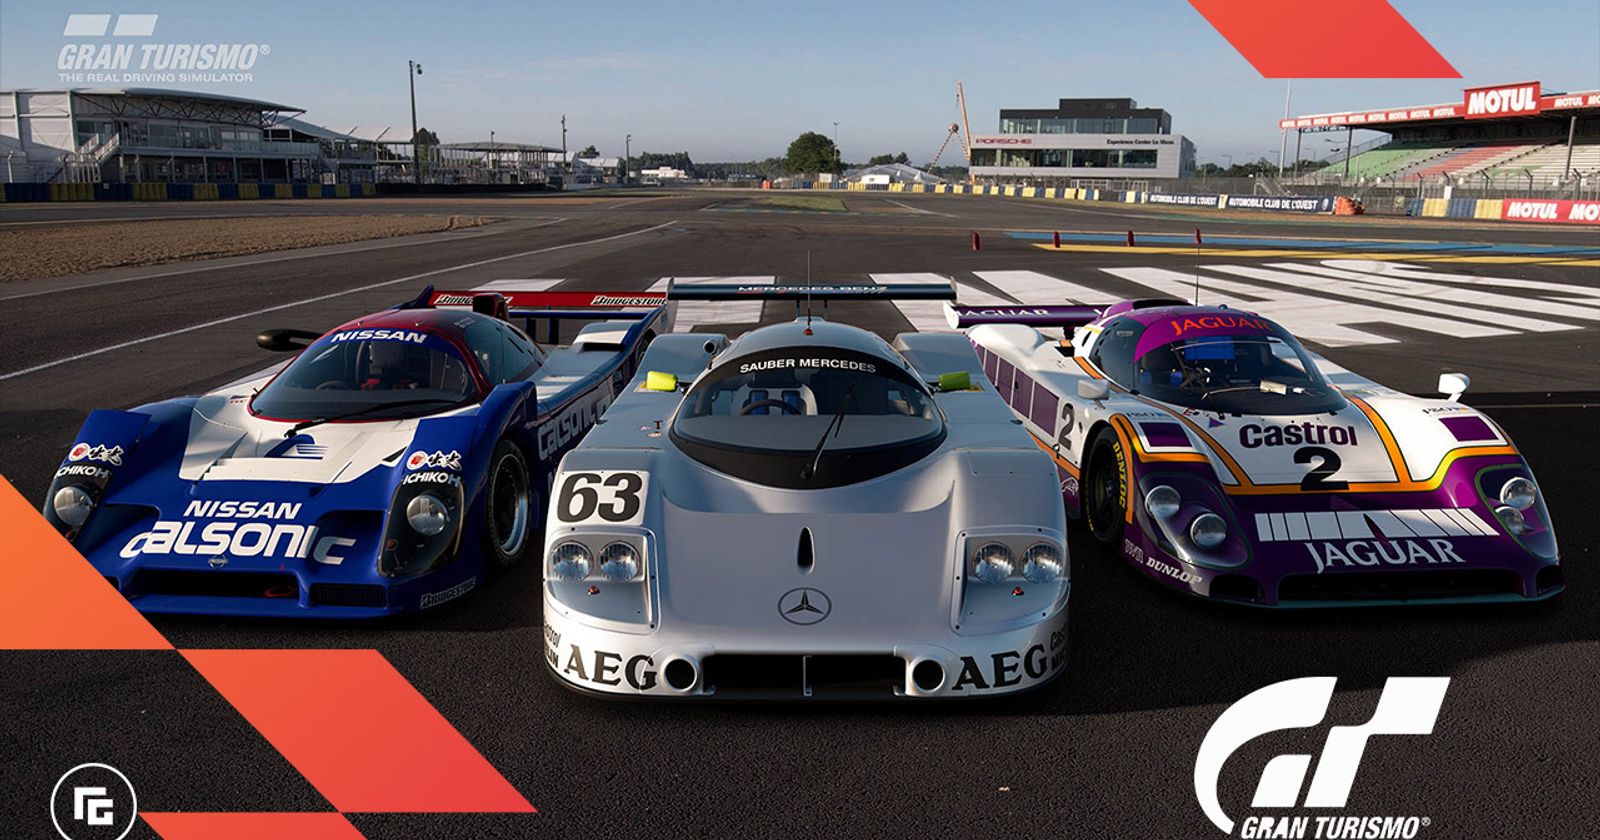 The best Gran Turismo 7 pre-order deals on PS5 and PS4